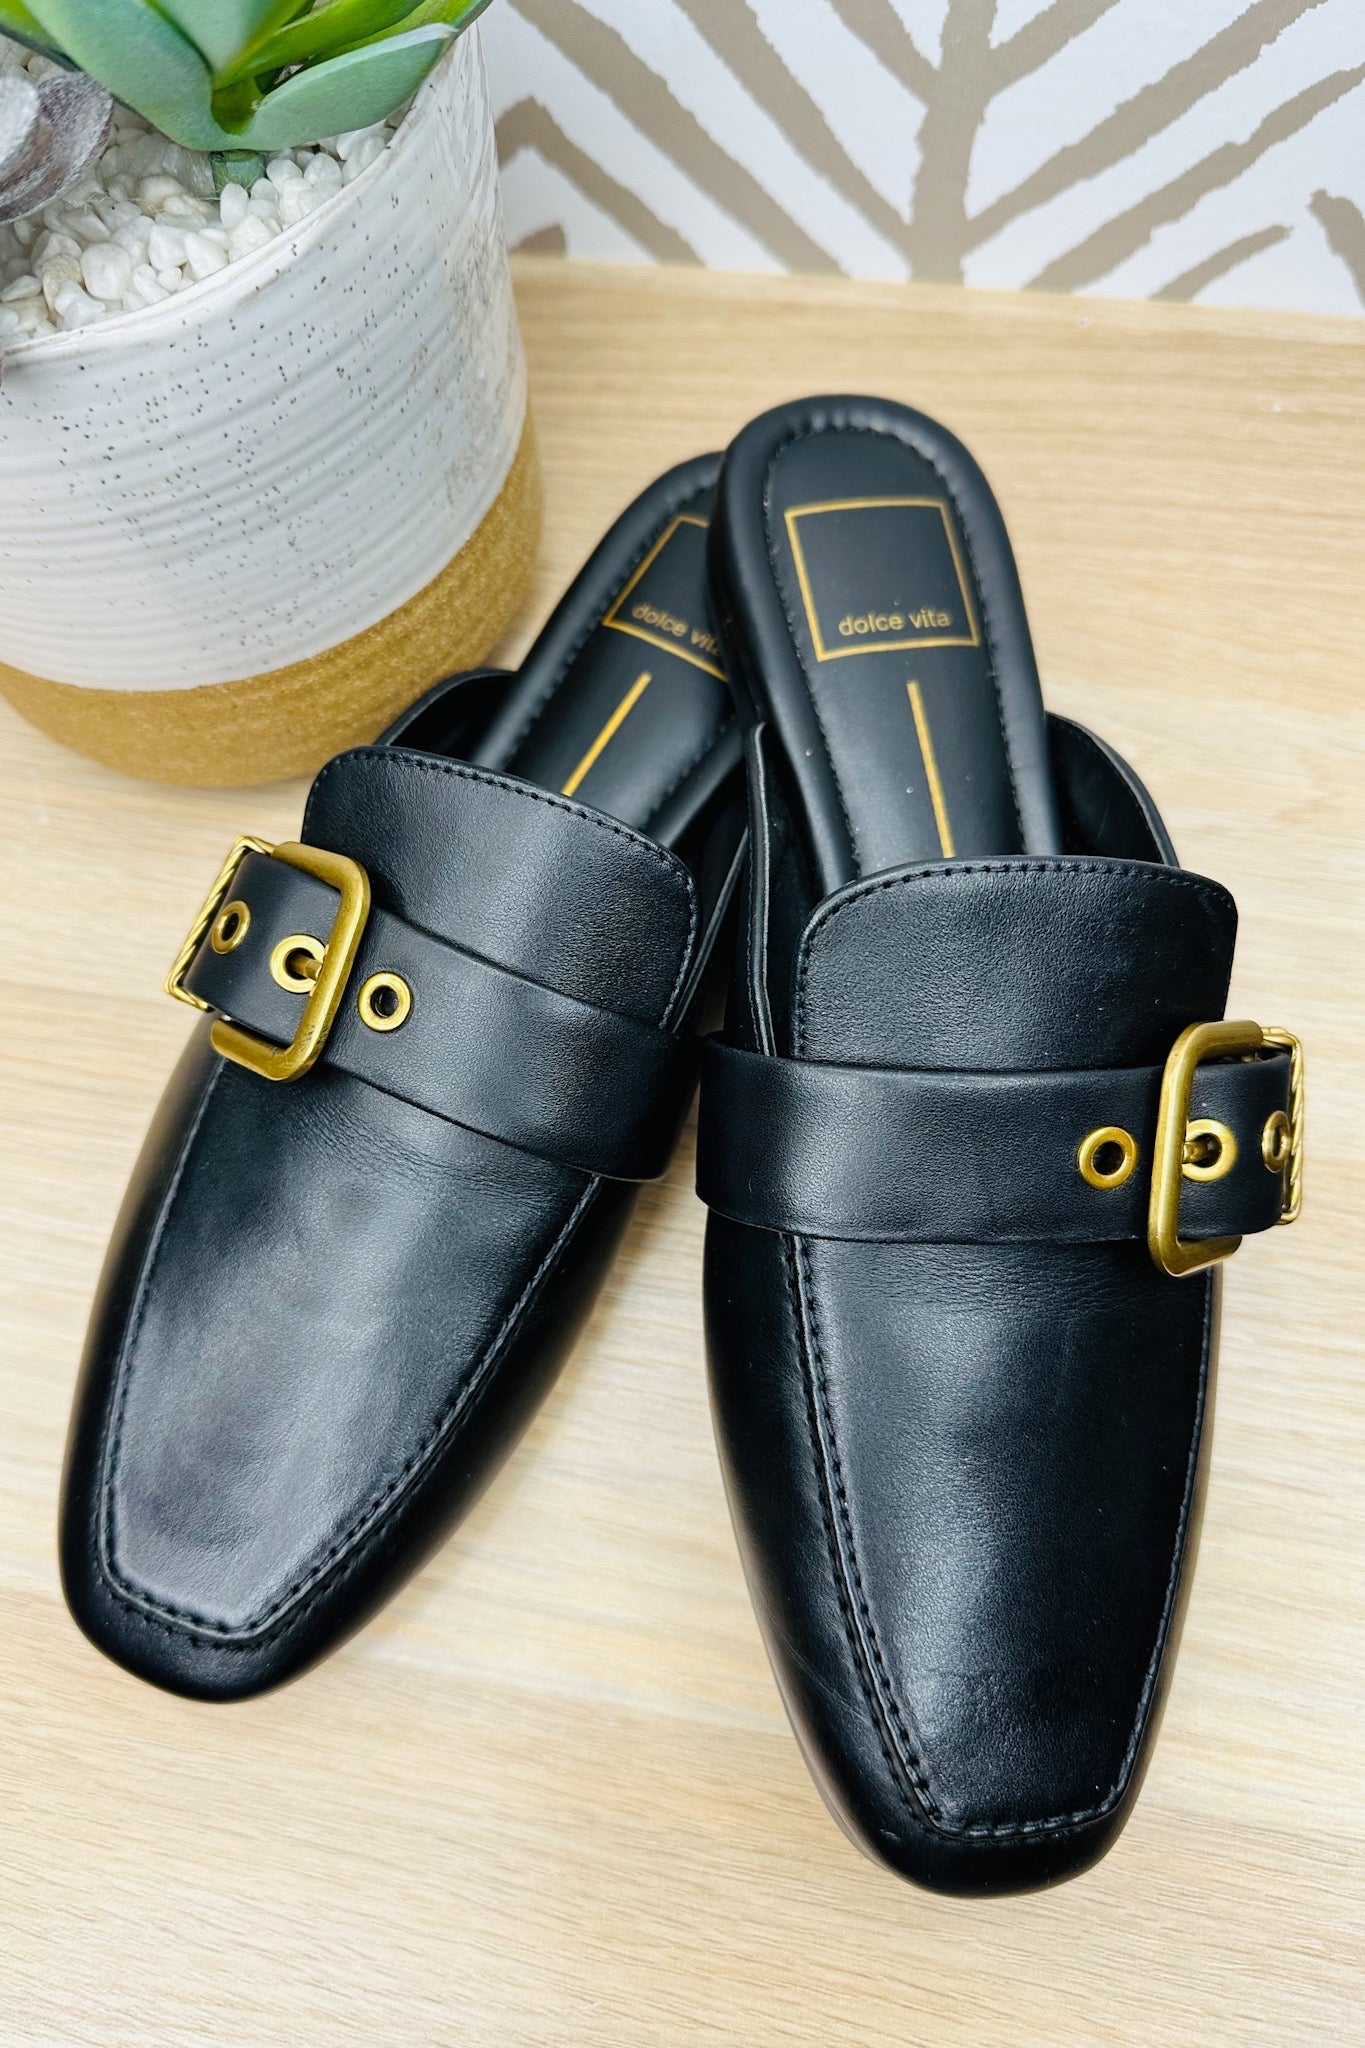 The Santel Black Leather Flat Mules by Dolce Vita